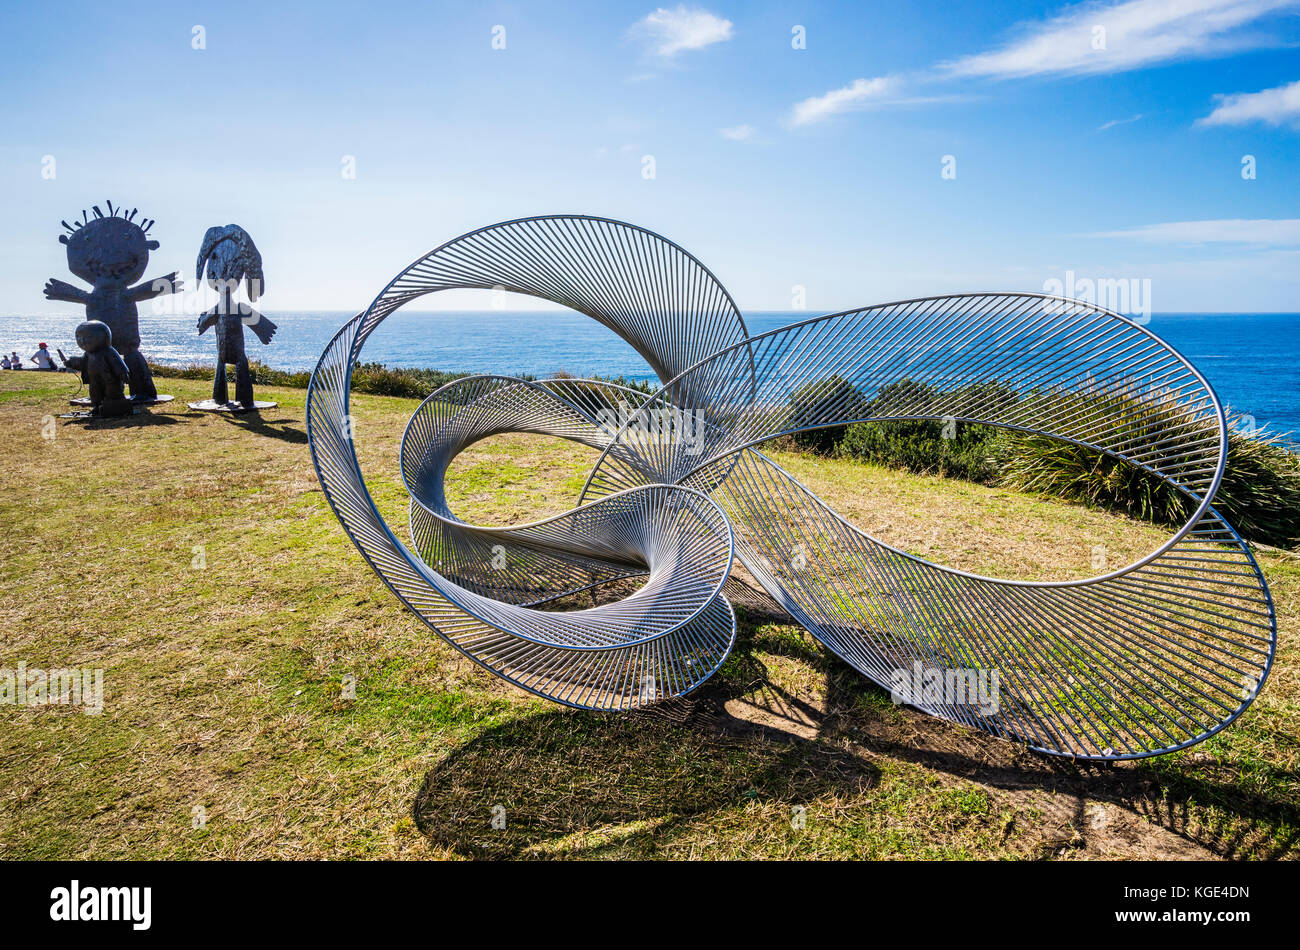 Sculpture by the sea 2017, annual exhibition on the coastal walk between Bondi and Tamara Beach, Sydney, New South Wales, Australia. Stainless steel s Stock Photo